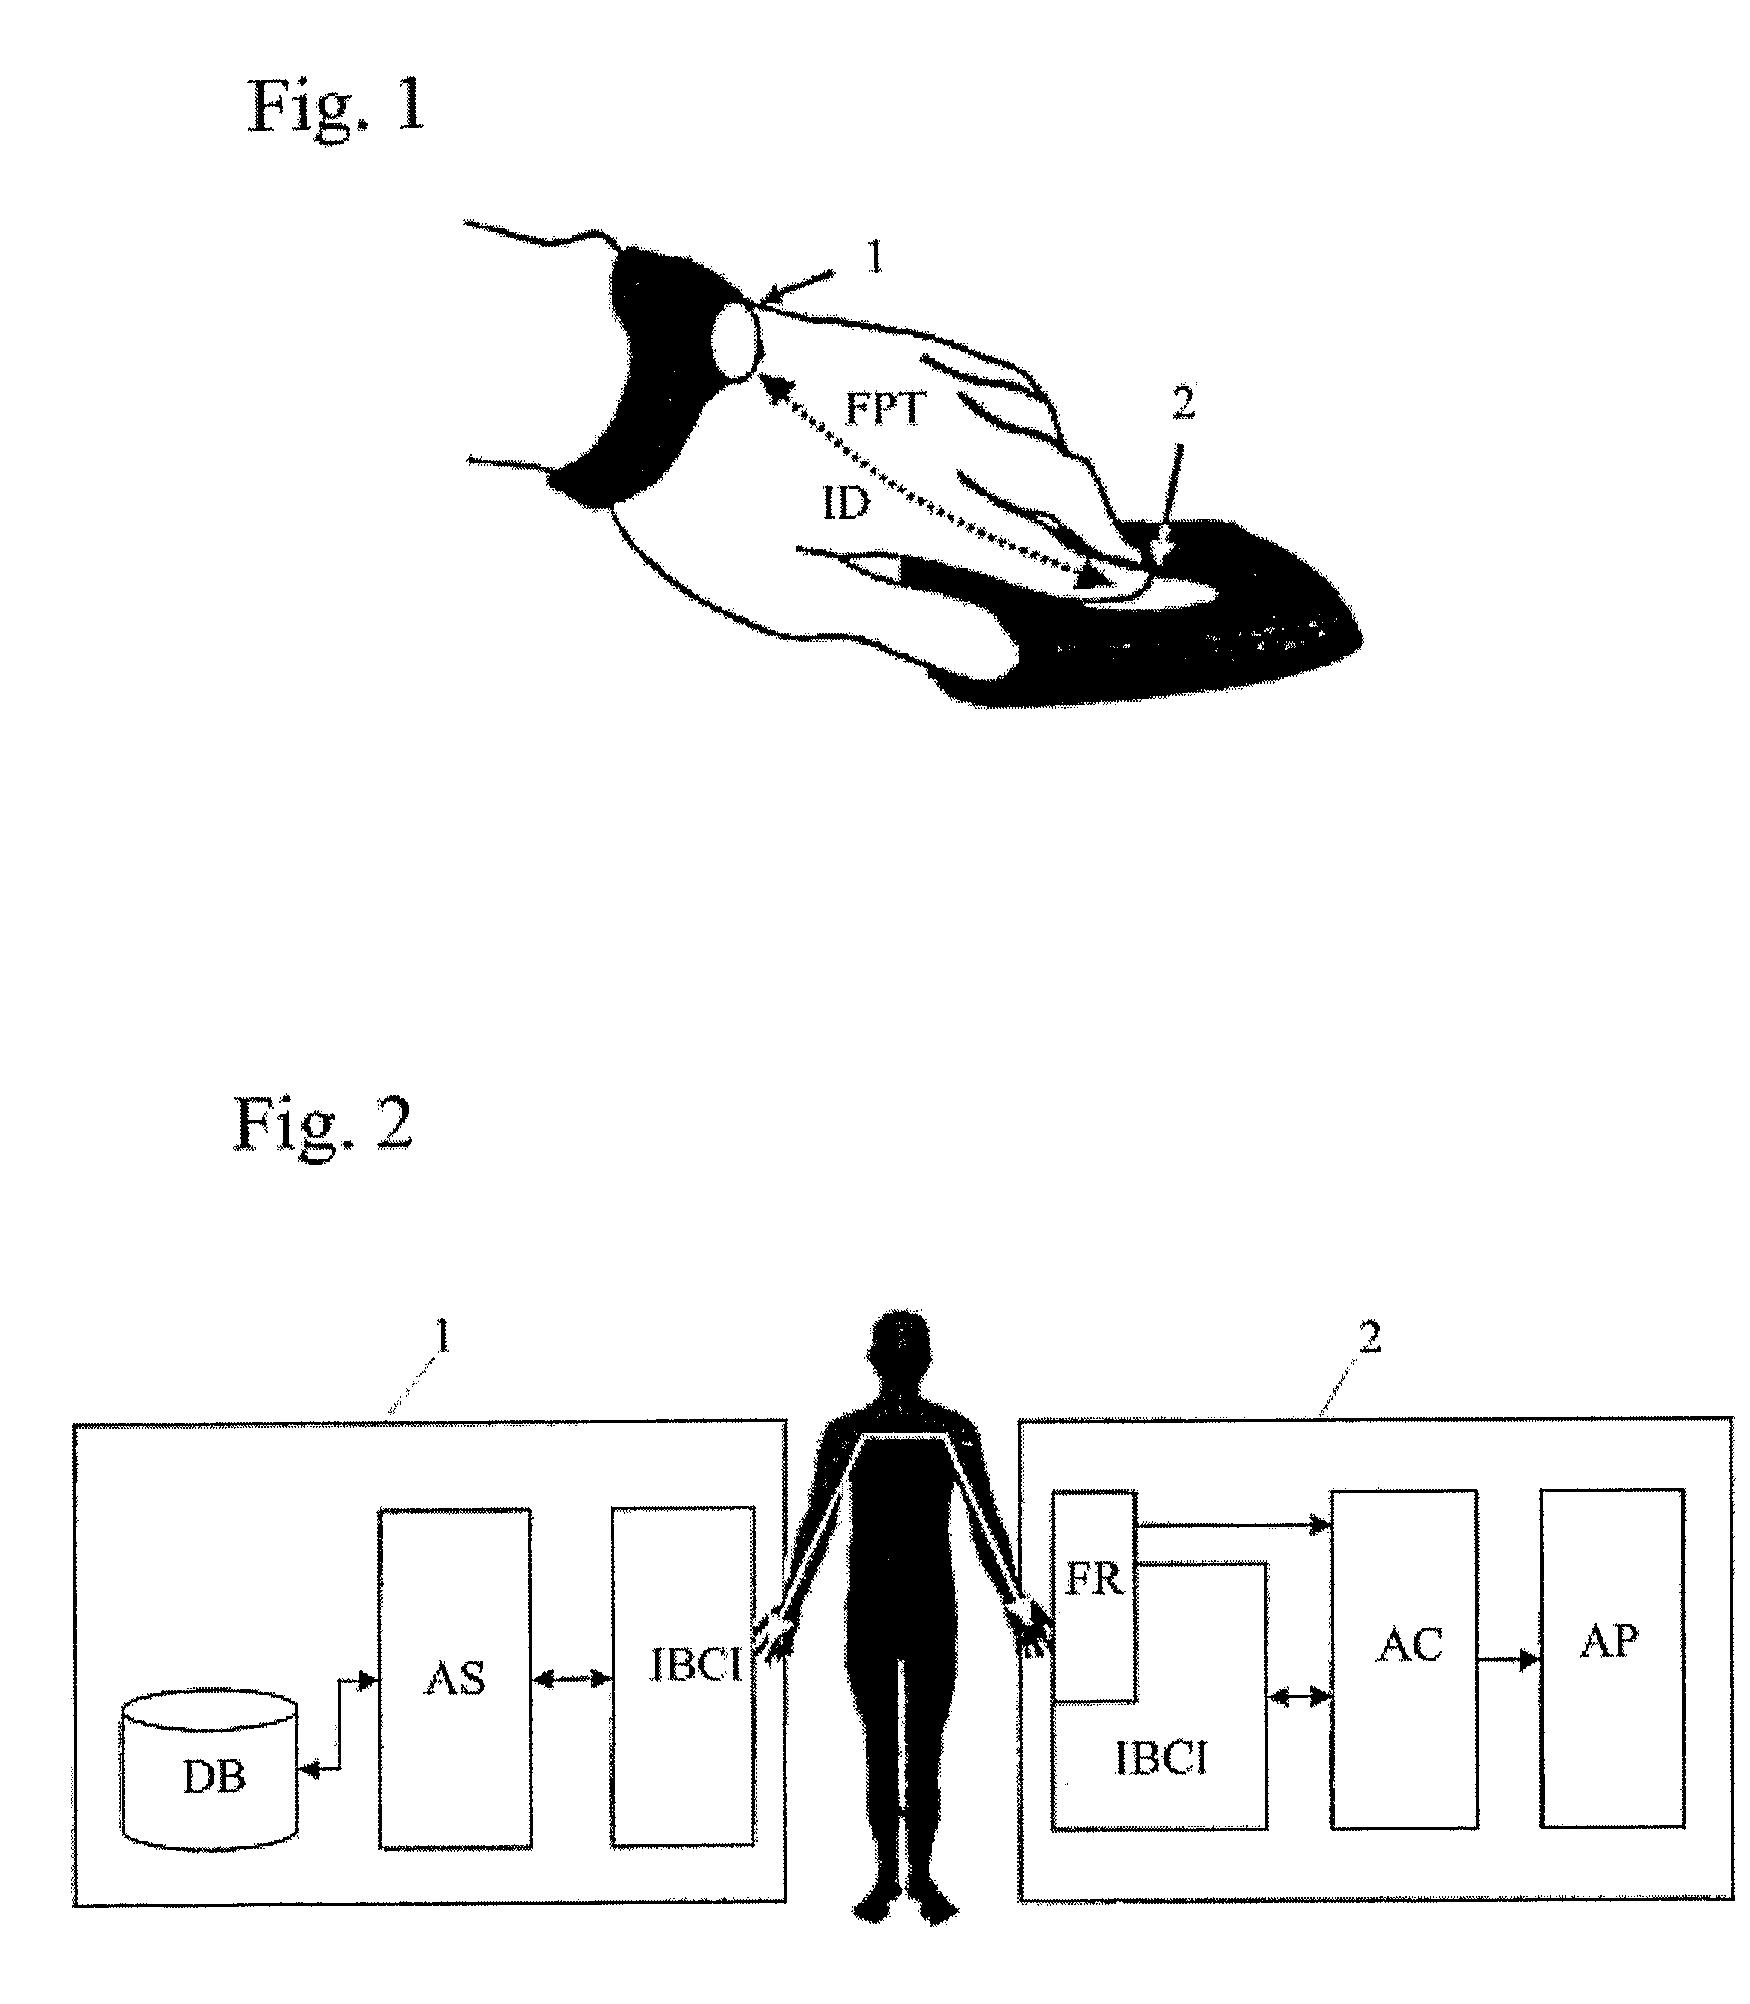 Identification system and method of operating same